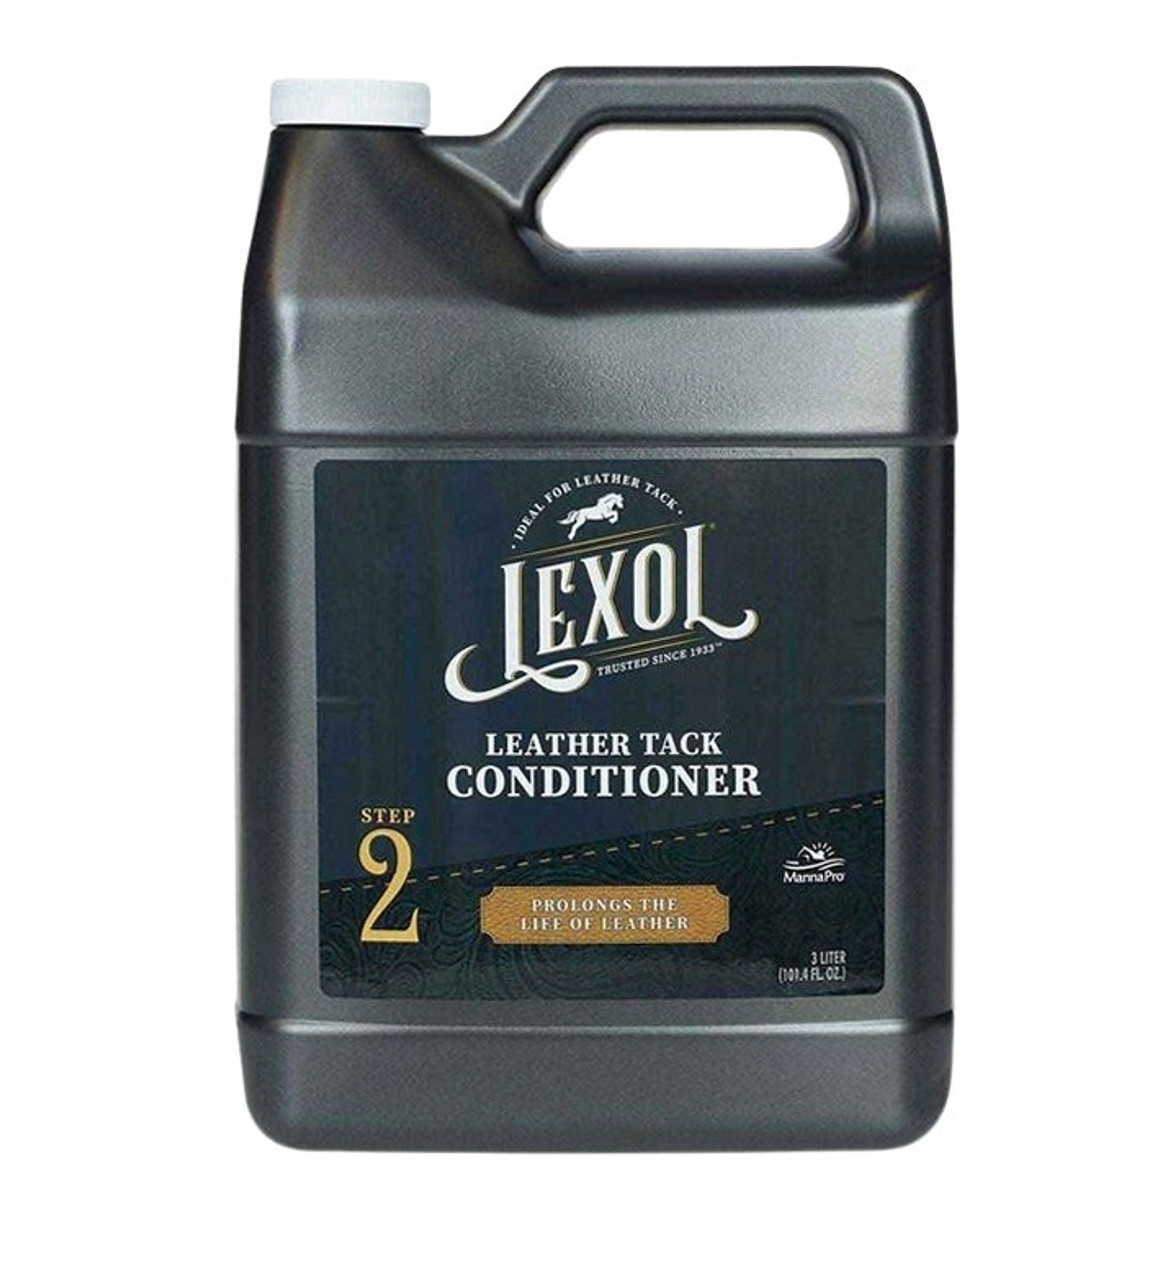 https://cdn11.bigcommerce.com/s-99vj2qx/images/stencil/1280x1280/products/10308/78857/lexol-leather-tack-conditioner-step2-3liter-new-label__19897.1608328746.JPG?c=2